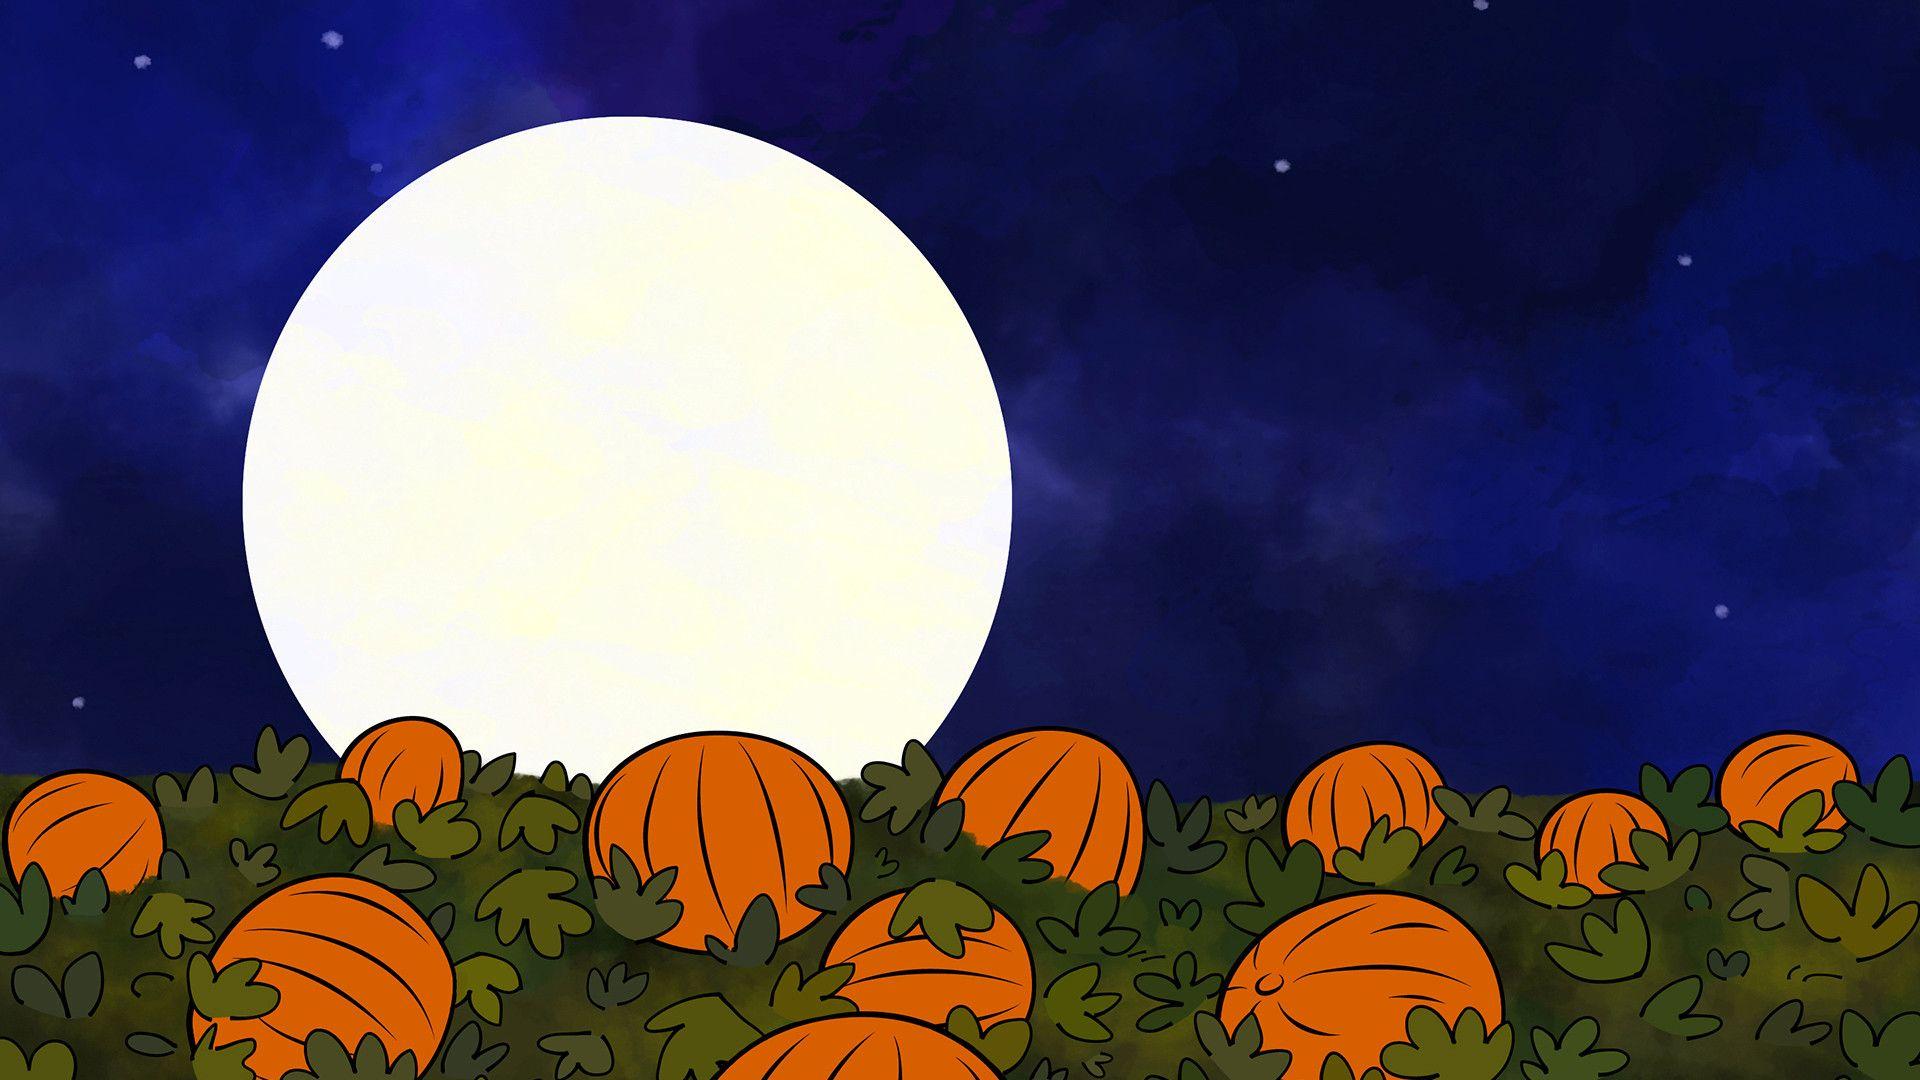 Great Pumpkin Charlie Brown Wallpaper background picture